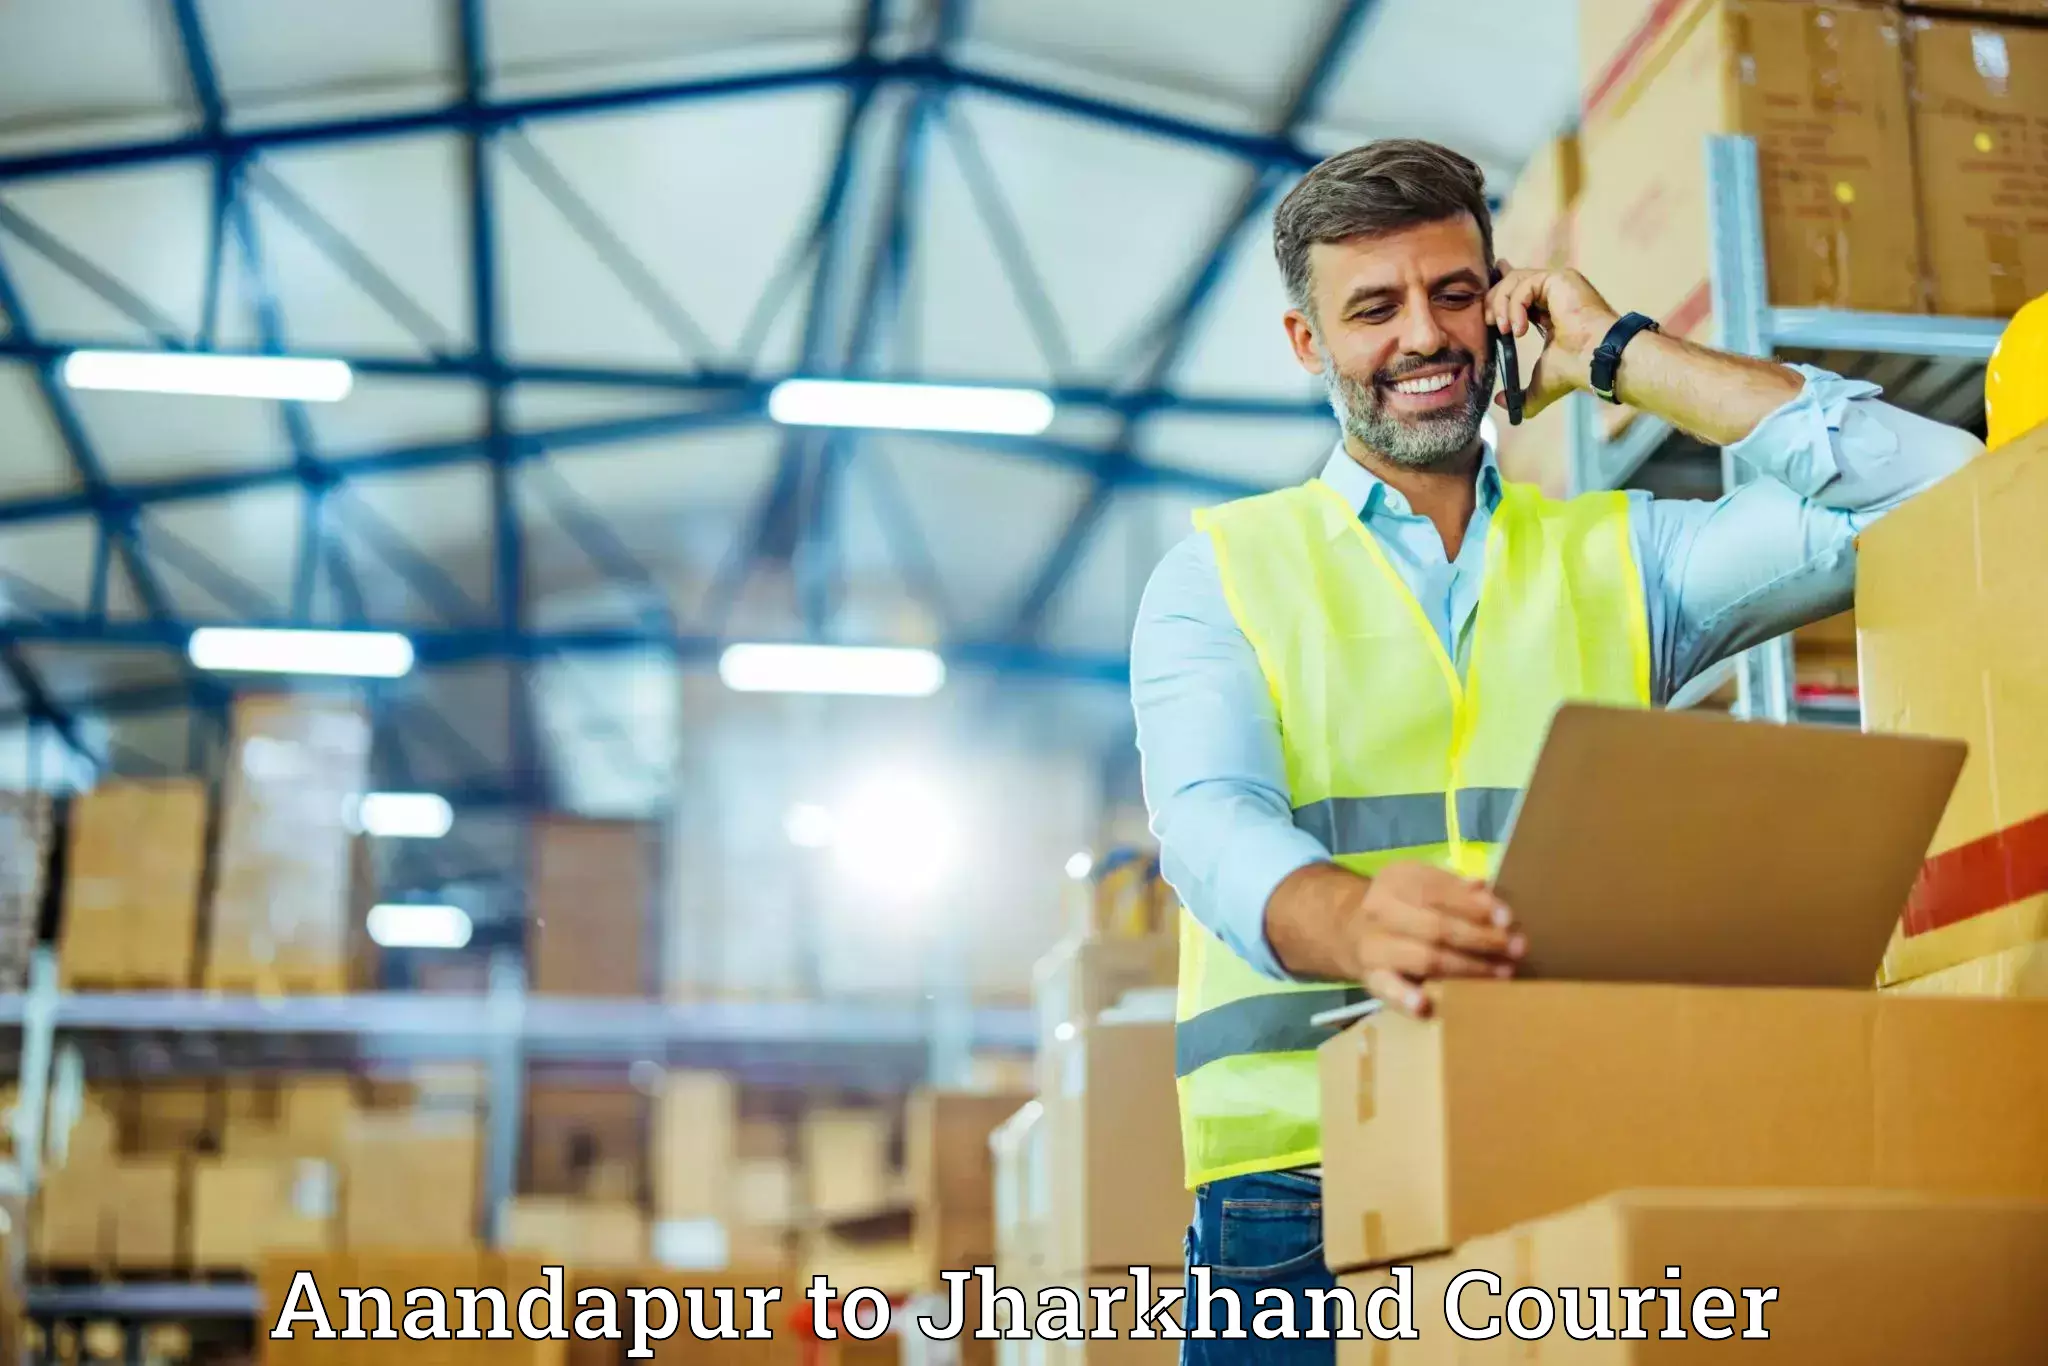 Customized relocation services in Anandapur to Jharkhand